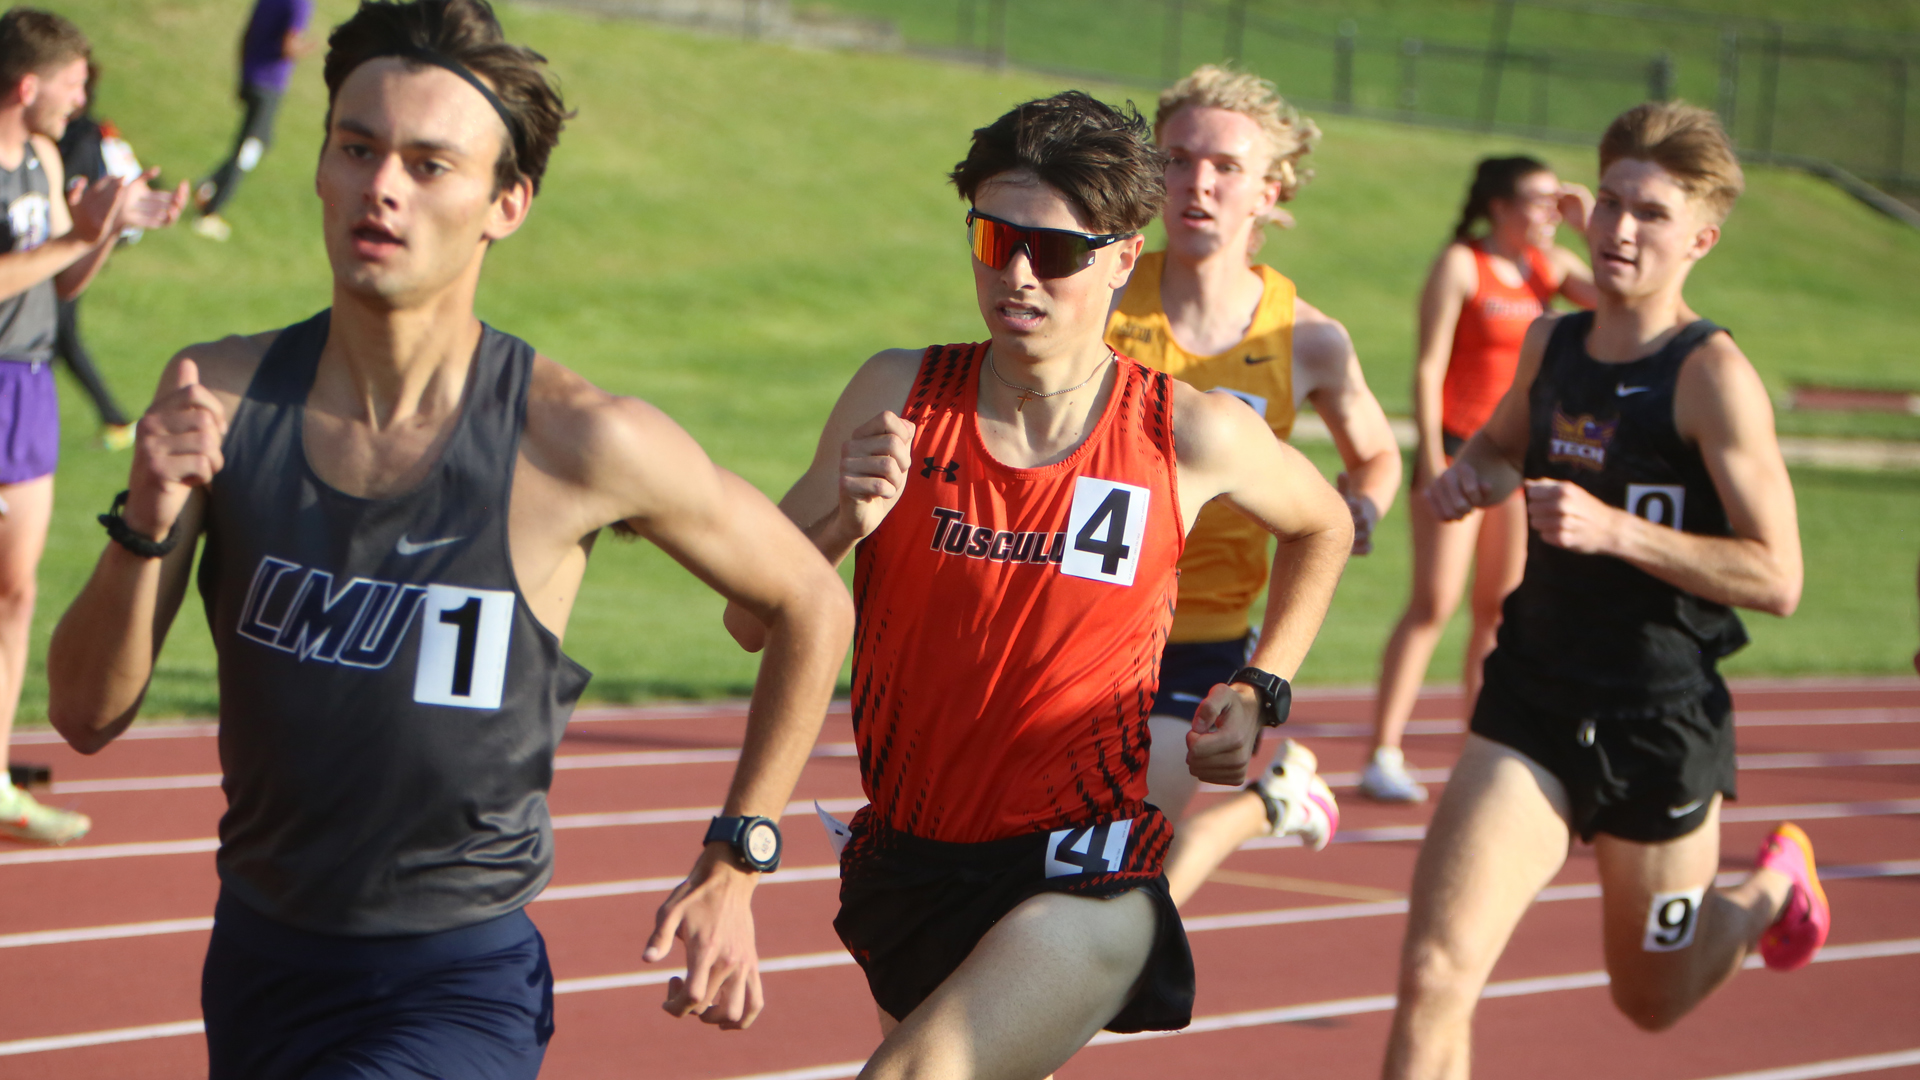 Pau Valdepenas established a new program record in the 1500 meters at the Catamount Classic (photo by Dom Donnelly)